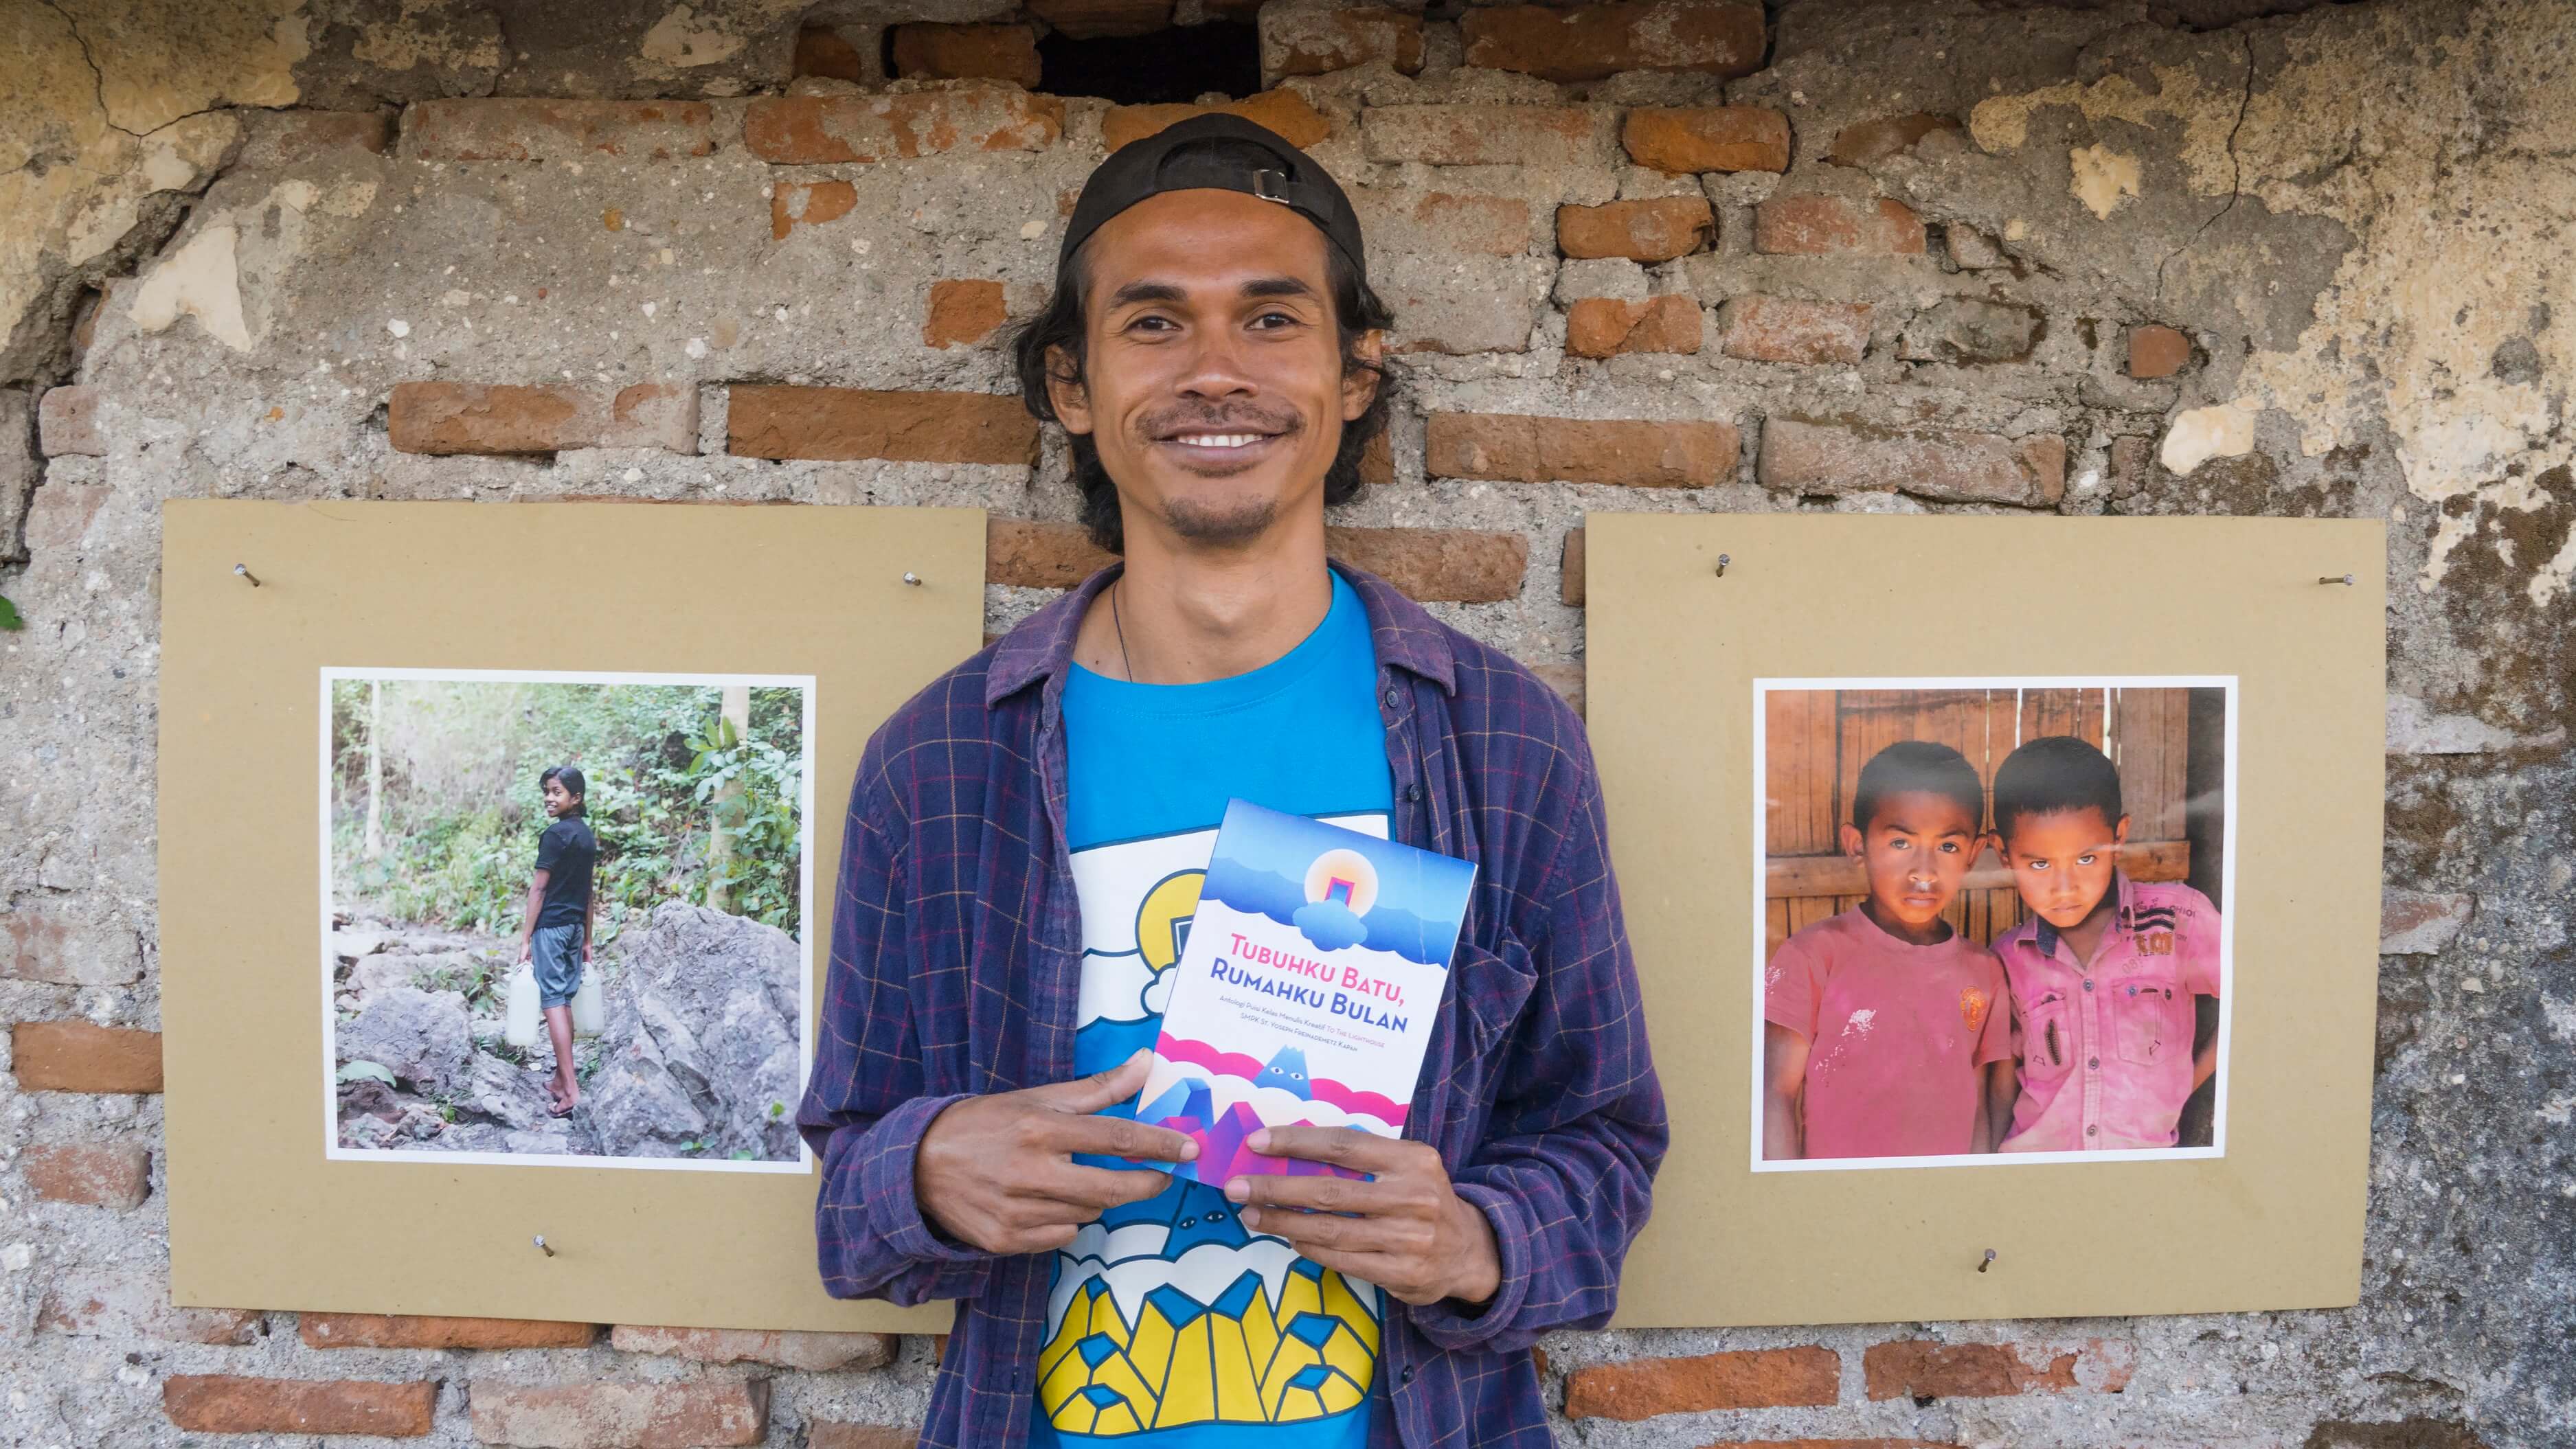 But along with other traditions, elafs were diminishing in Mollo society, prompting Dicky Senda (pictured), a short story writer, to open a library for Mollo children in his home village of Taiftob. Photo by Andra Fembriarto